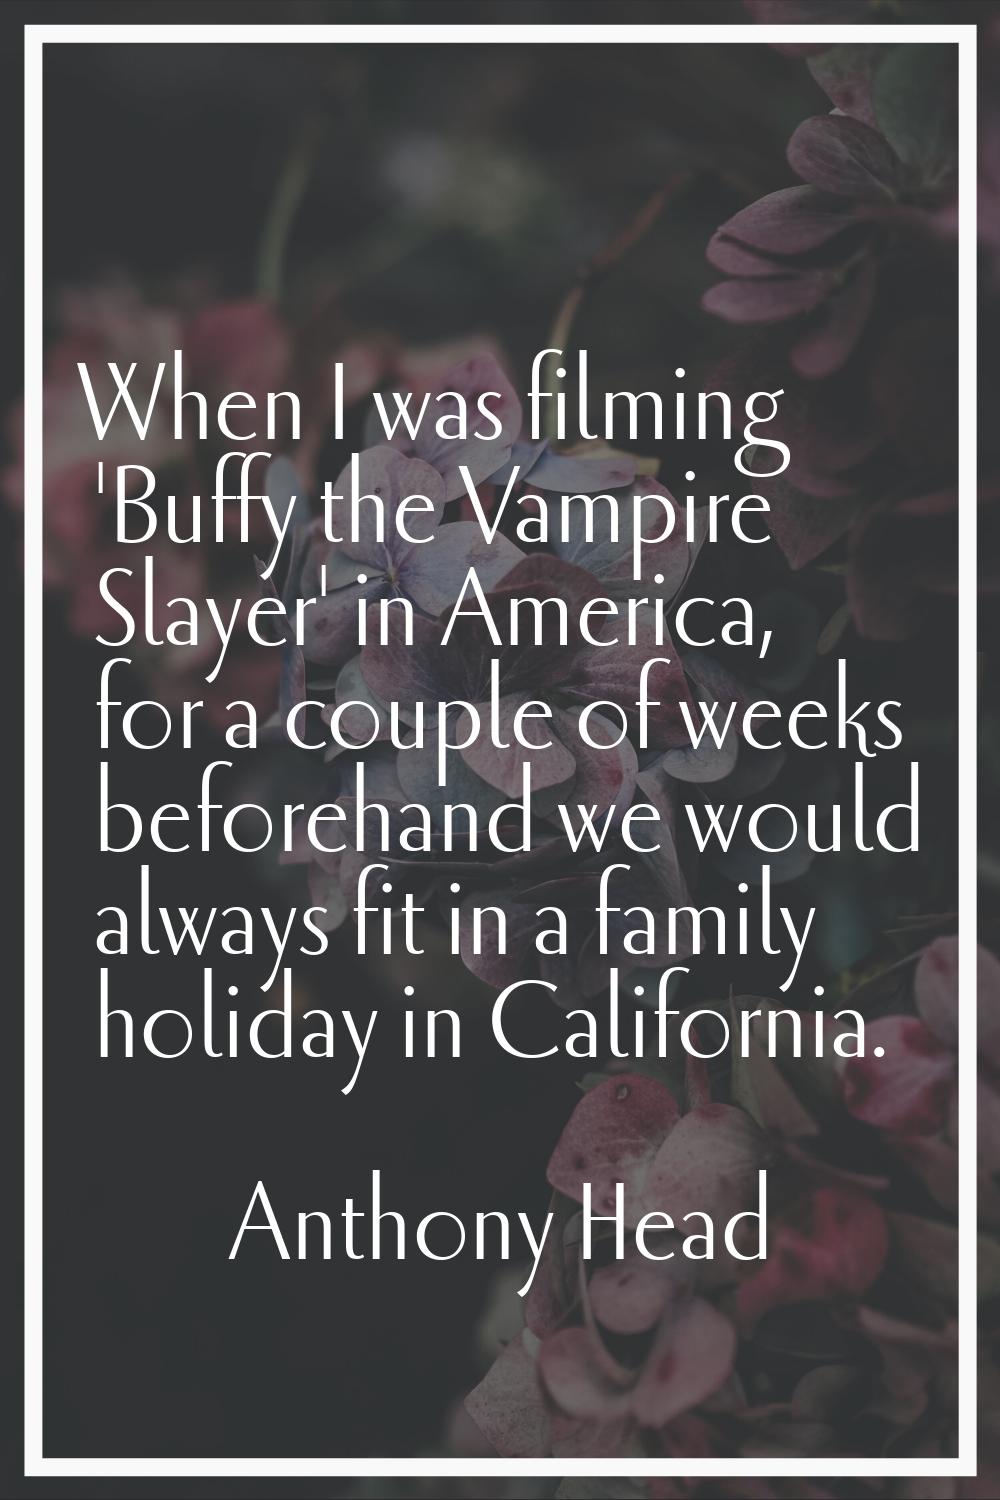 When I was filming 'Buffy the Vampire Slayer' in America, for a couple of weeks beforehand we would